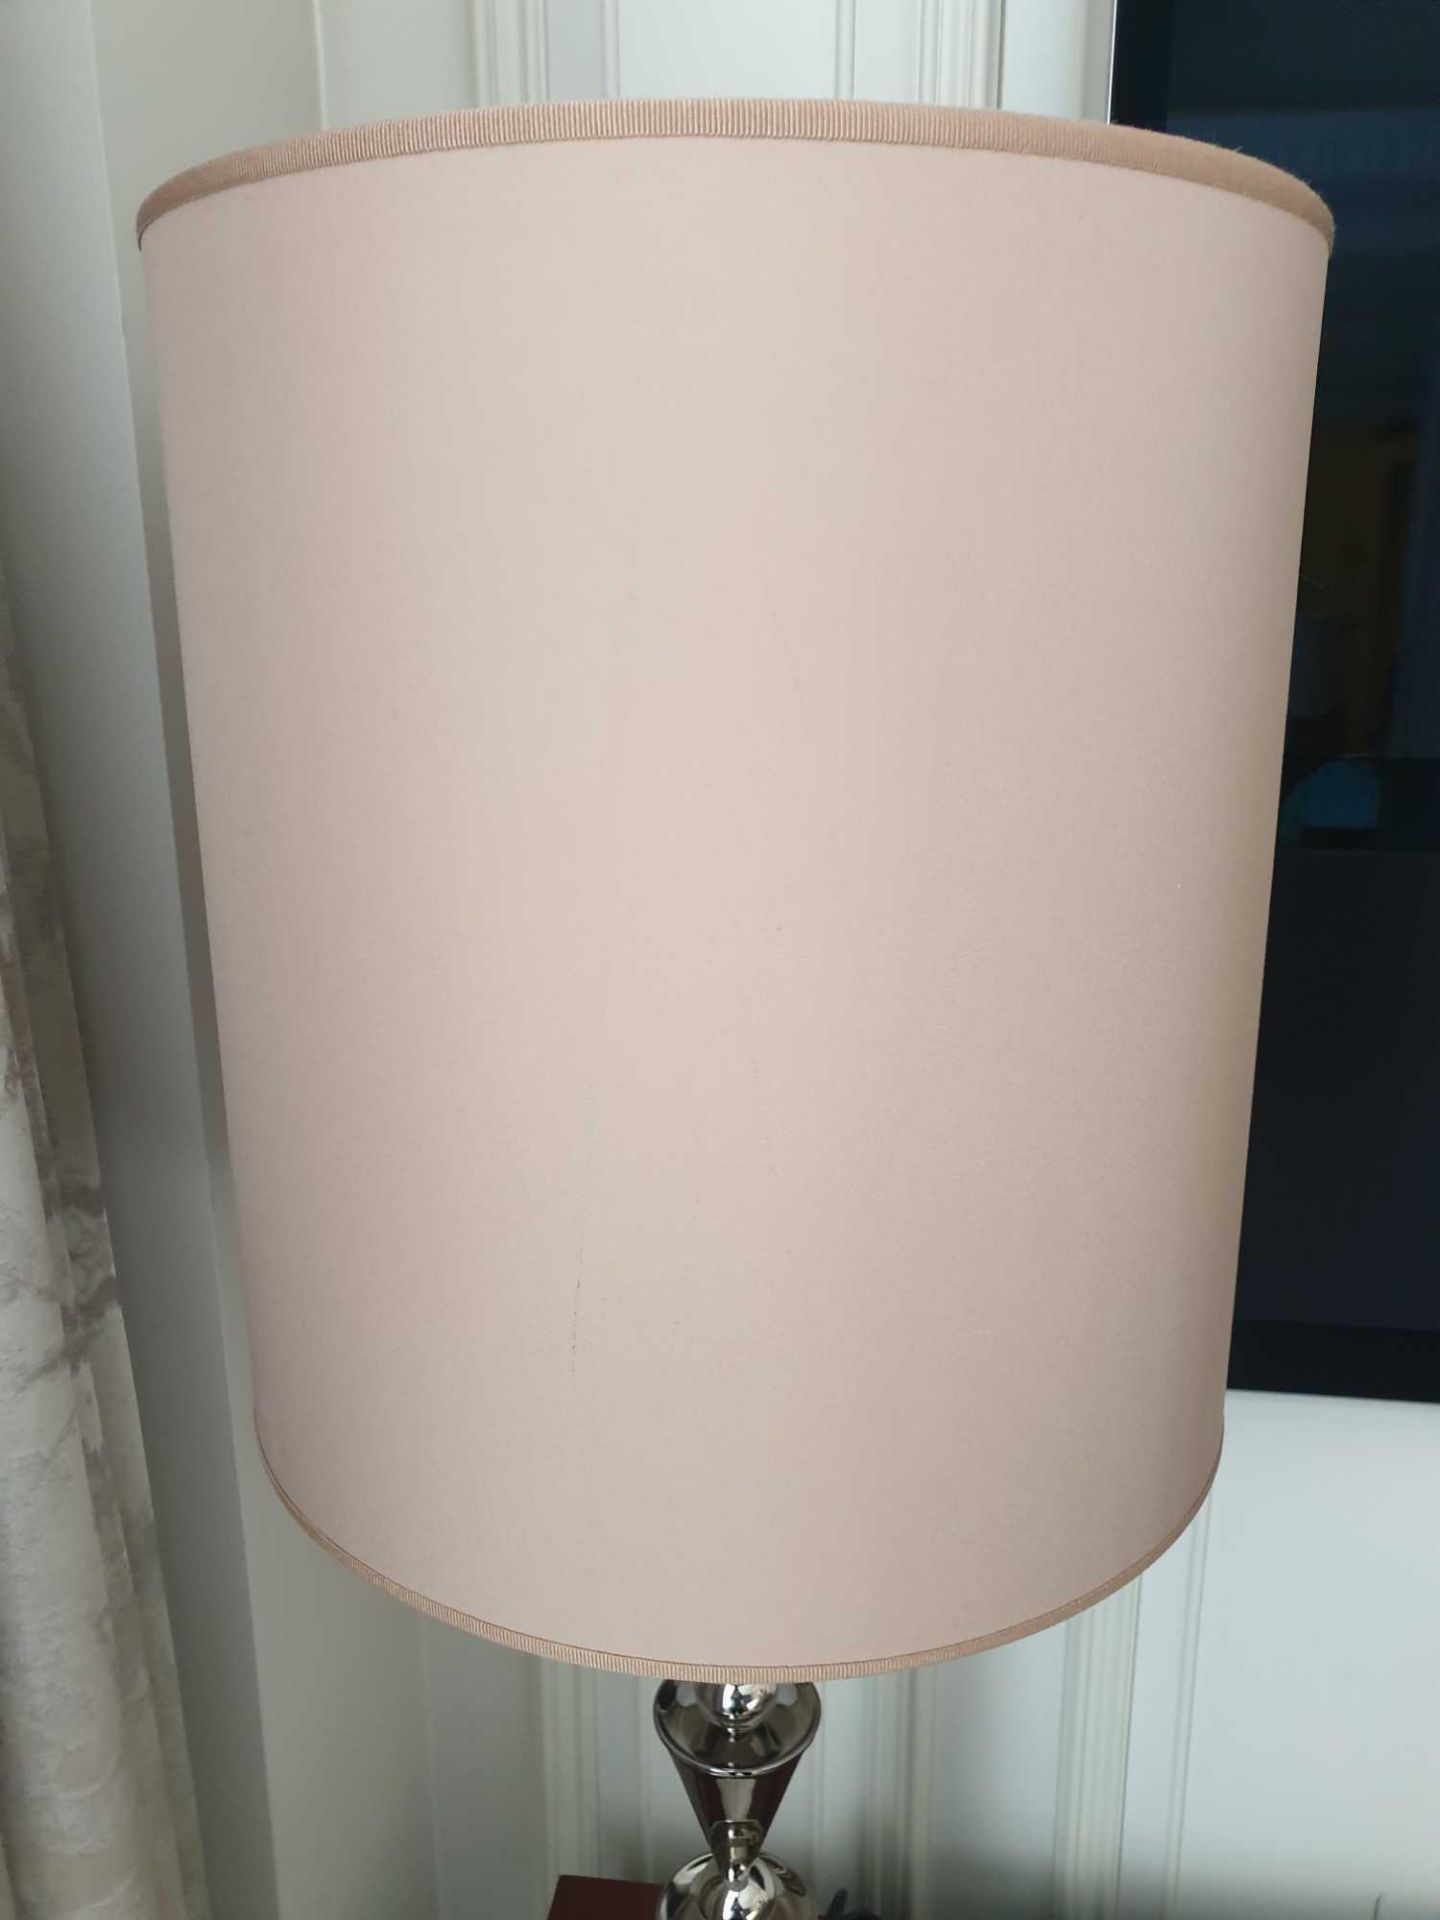 Polished Nickel Table Lamp With Shade 90cm (Room 332) (This lot is located in Bath) - Image 3 of 3